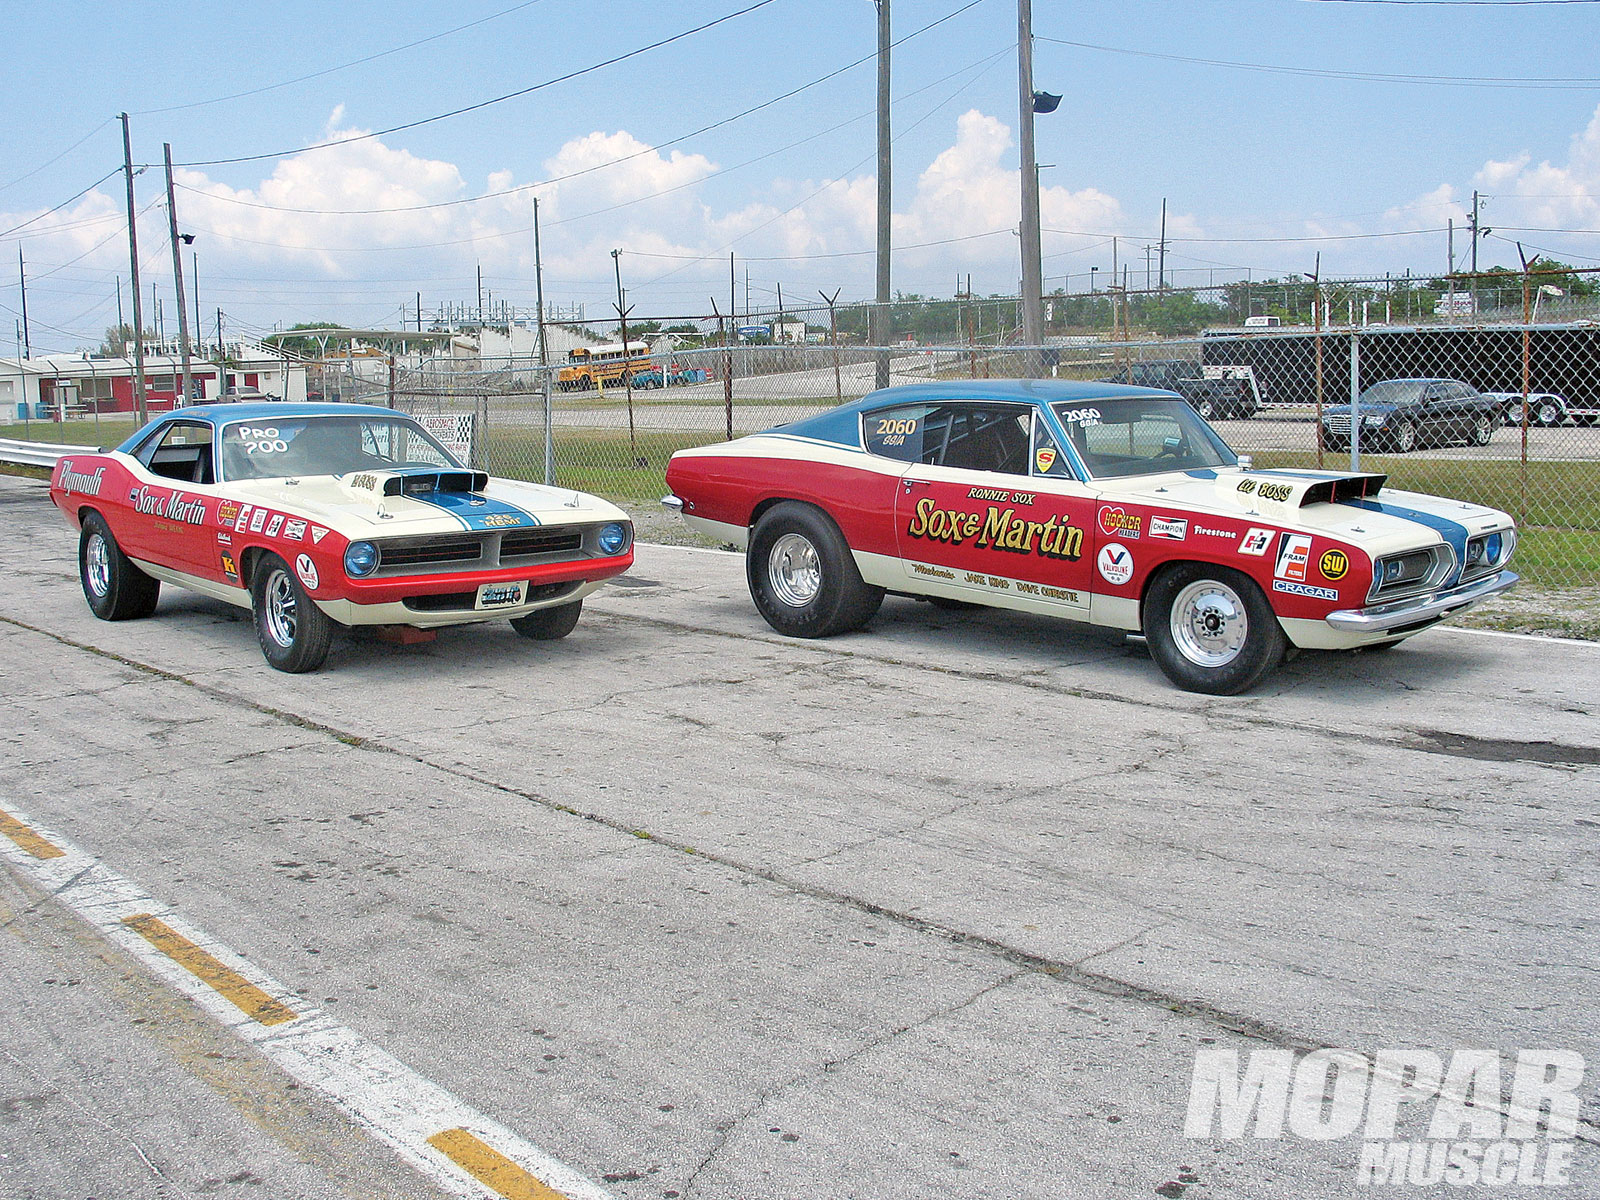 sox, And, Martin, Plymouth, Cuda, Drag, Racing, Race, Muscle, Hot, Rod, Rods Wallpaper